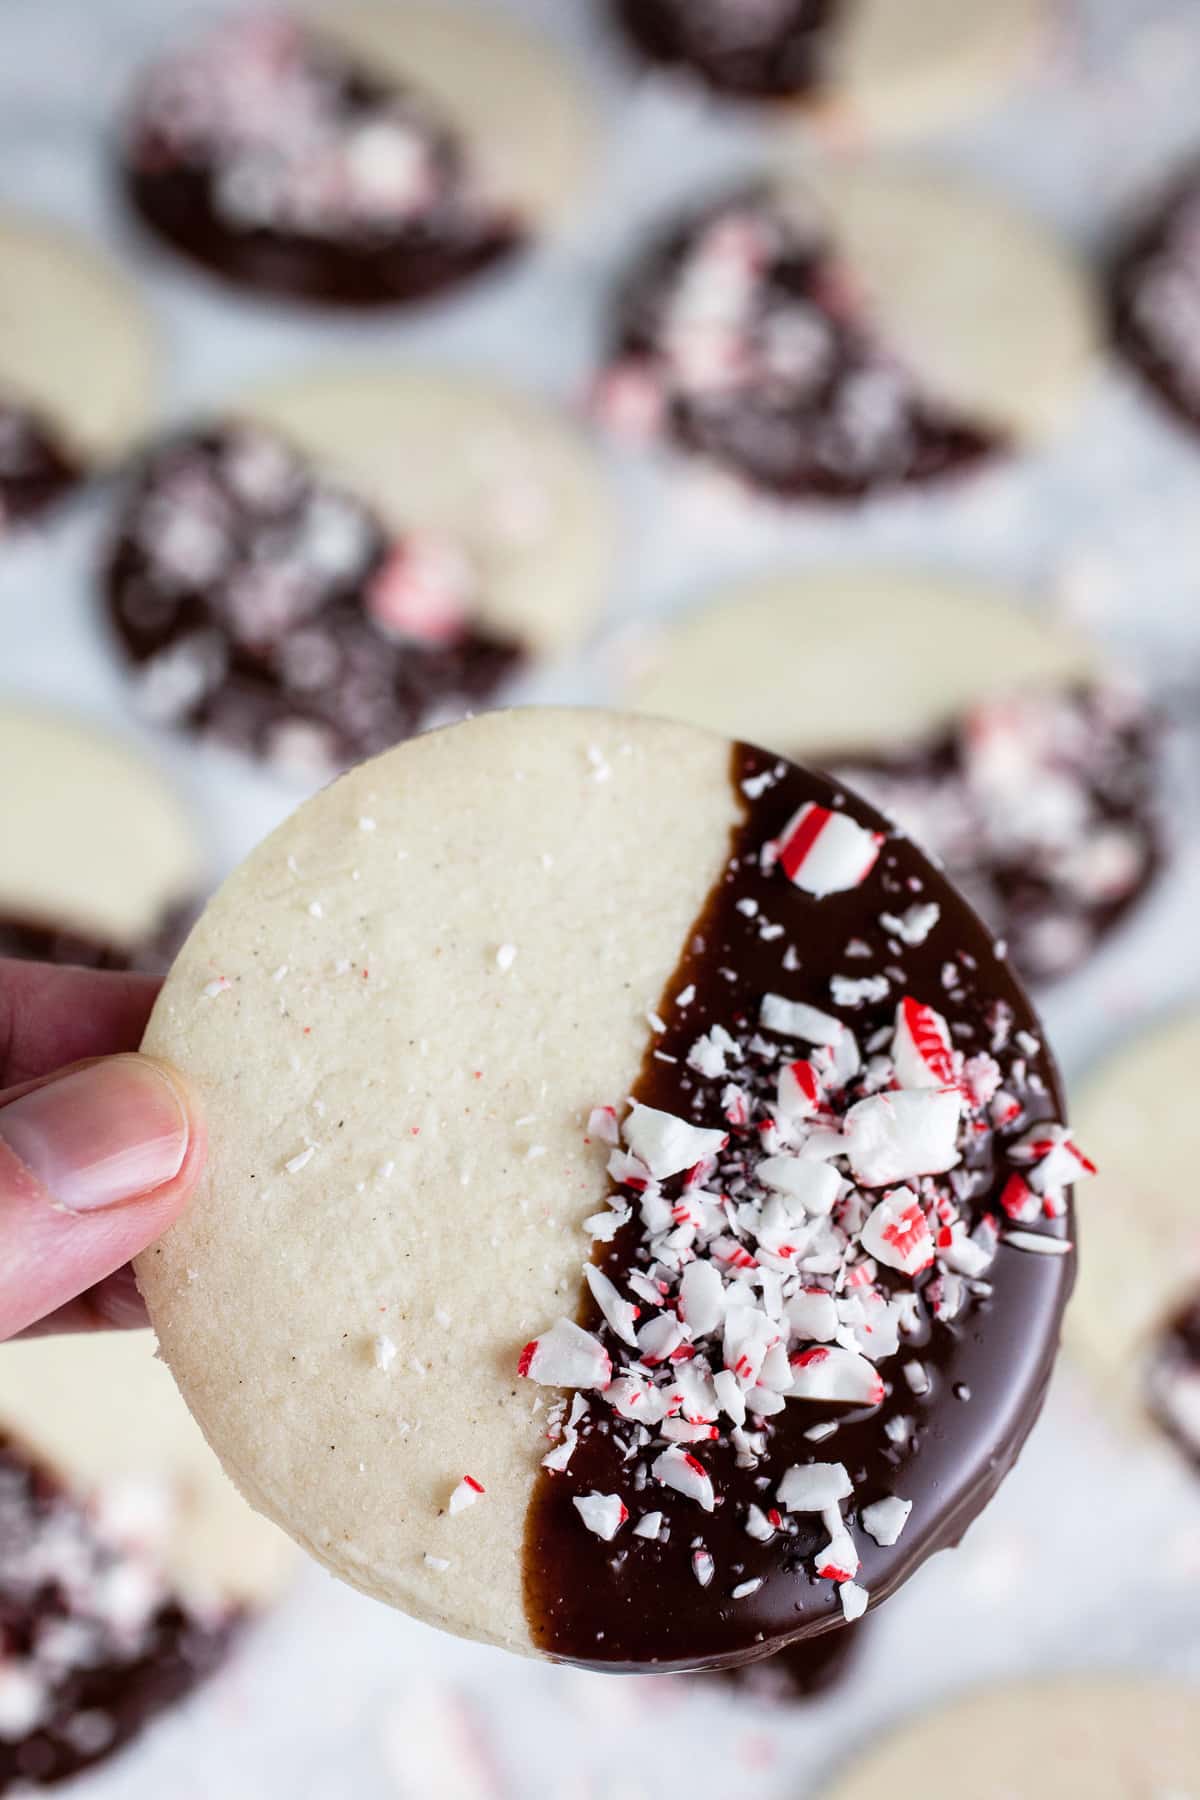 Fingers holding peppermint shortbread cookie dipped in chocolate and crushed peppermint candies.